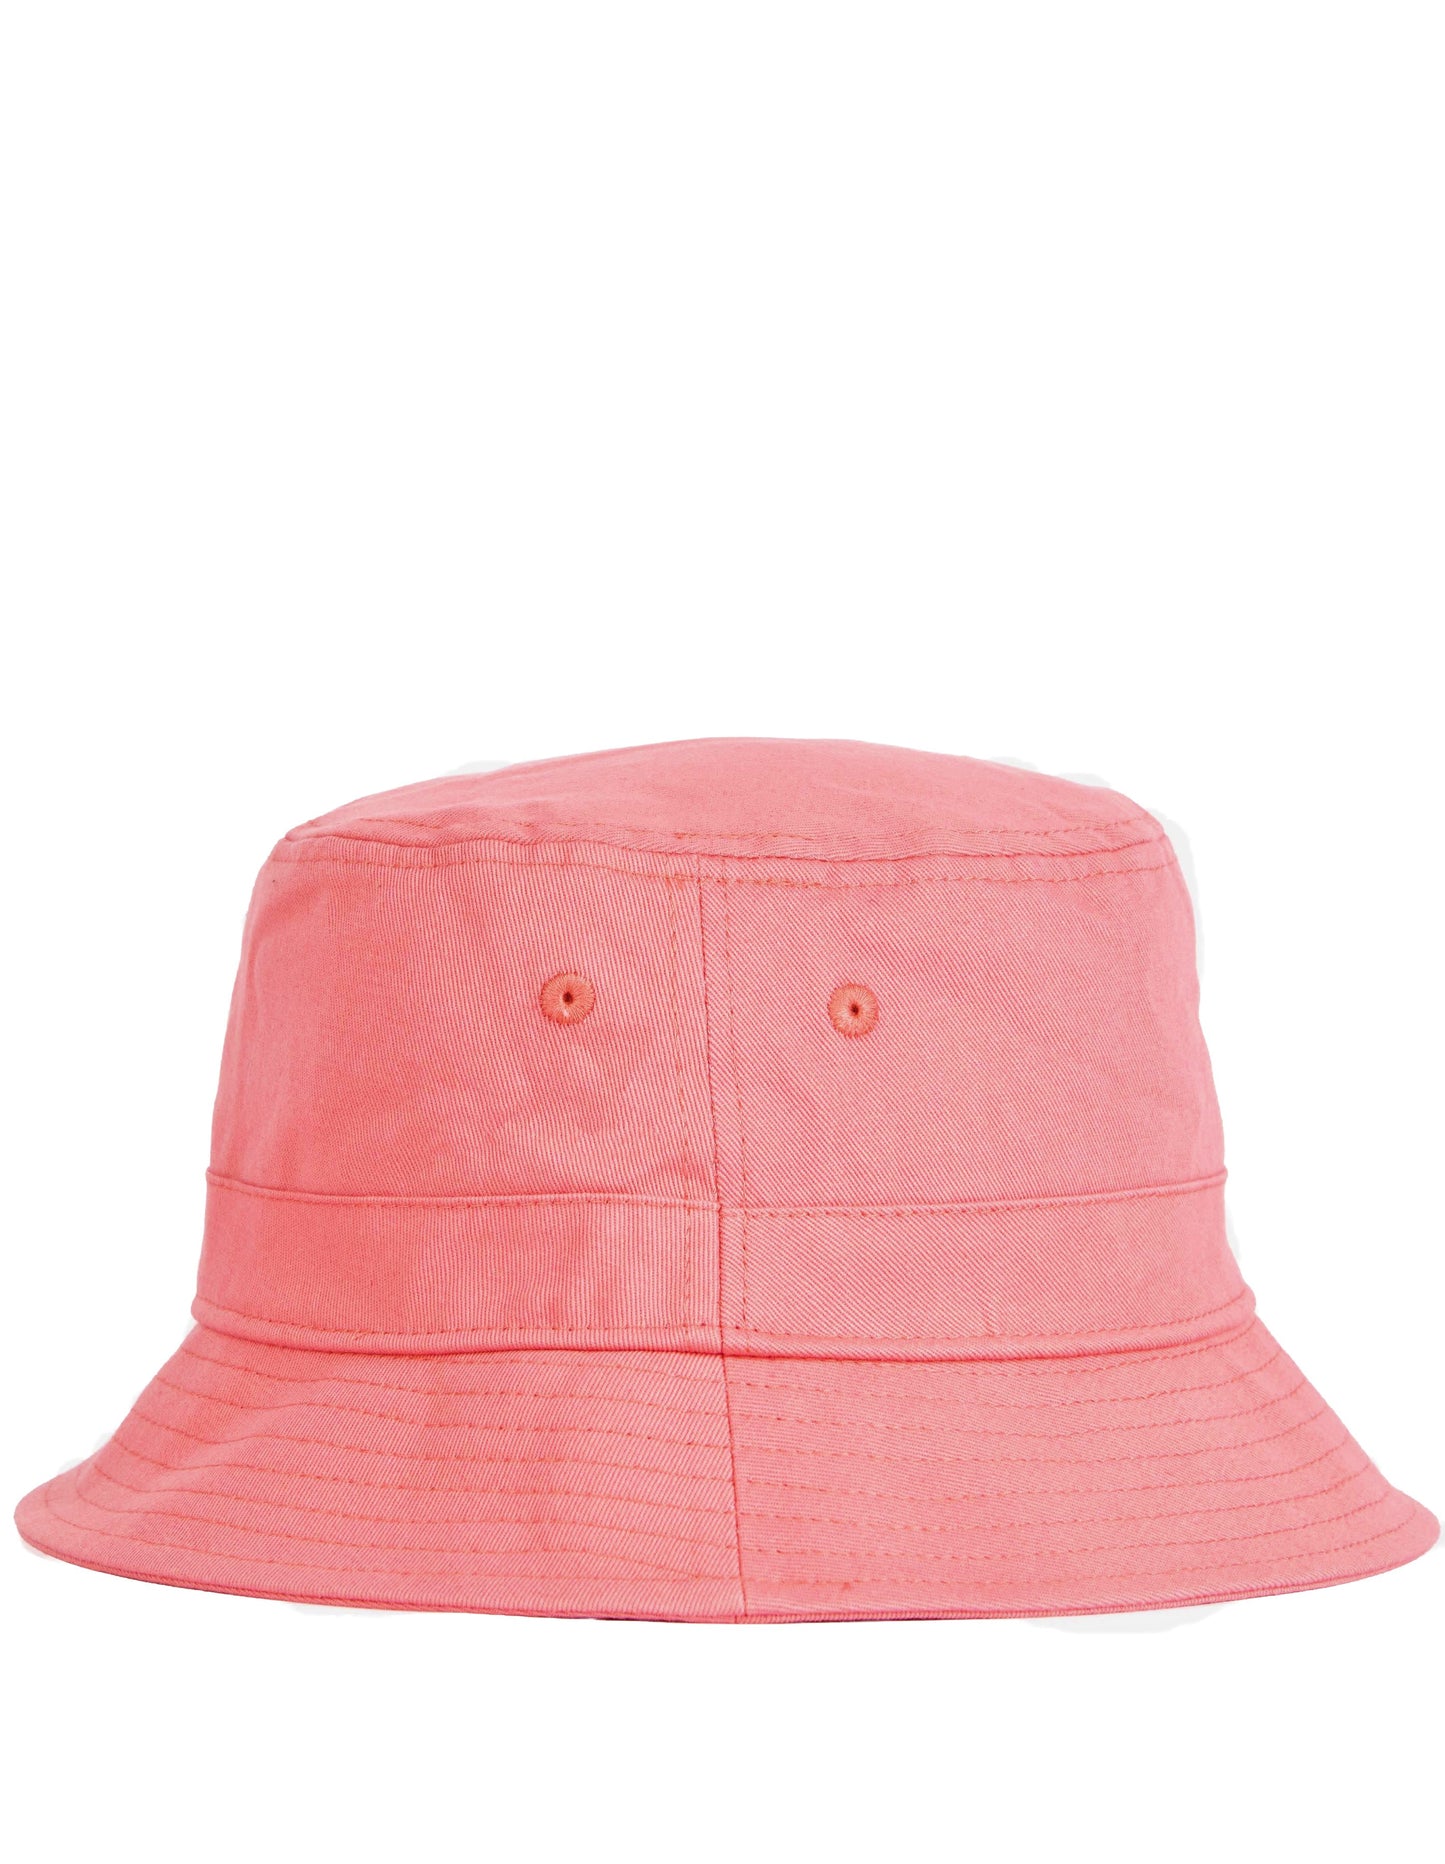 Barbour LHA0508 Olivia Sports Hat cappello donna